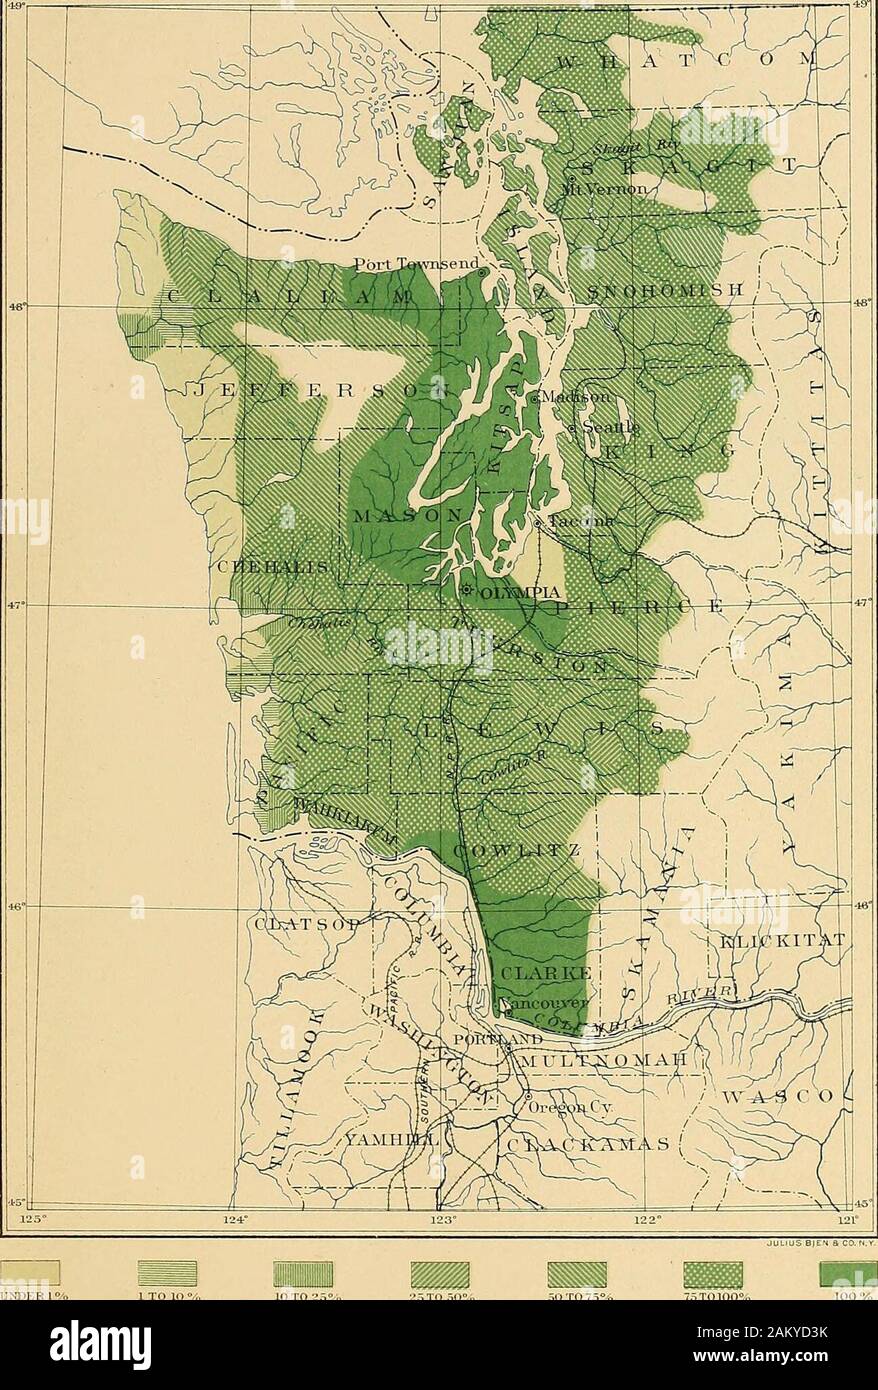 The forests of the United States . PRELIMINARY MAPOFWKSTERN OREGON SDOWLNG 111! DENSITY OF MK1H llNTiM K riMHKII.EIFRESSKD W FEET, » M U.S-GEOLOGI CAU SURVEY NINETEENTH ANNUAL REPORT PART V. PL V. UM)ER1% 1 TO 10 % 10T025°o 25T0 50% 5OT075°ii 75T0100% MAP SHOWING THE DISTRIBUTION OF RED FIREXPRESSED m PERCENTAGES OF TOTAL FOREST IN WE STERN WASHINGTON. SCALE25 0 25 50 75 100 SOLES U.S. GEO LOGICAL SURVEY. NINETEENTH ANNUAL REPORT PART V. PL. VI Stock Photo